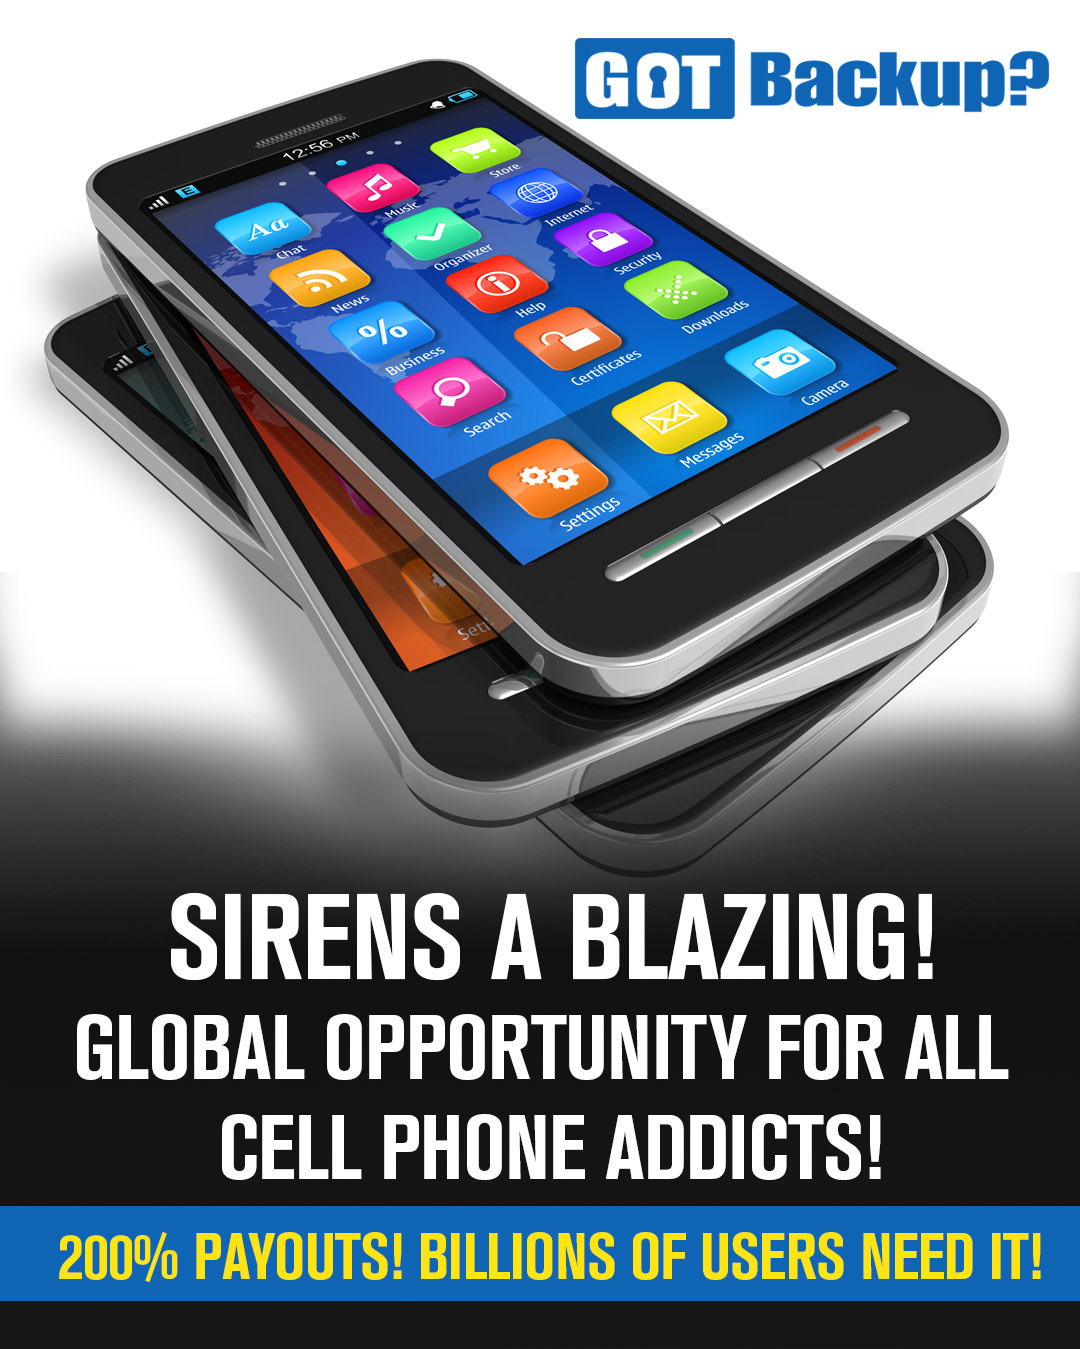 Global Opportunity For All Cell Phone addicts!
200% Payouts! Billions of users need it!